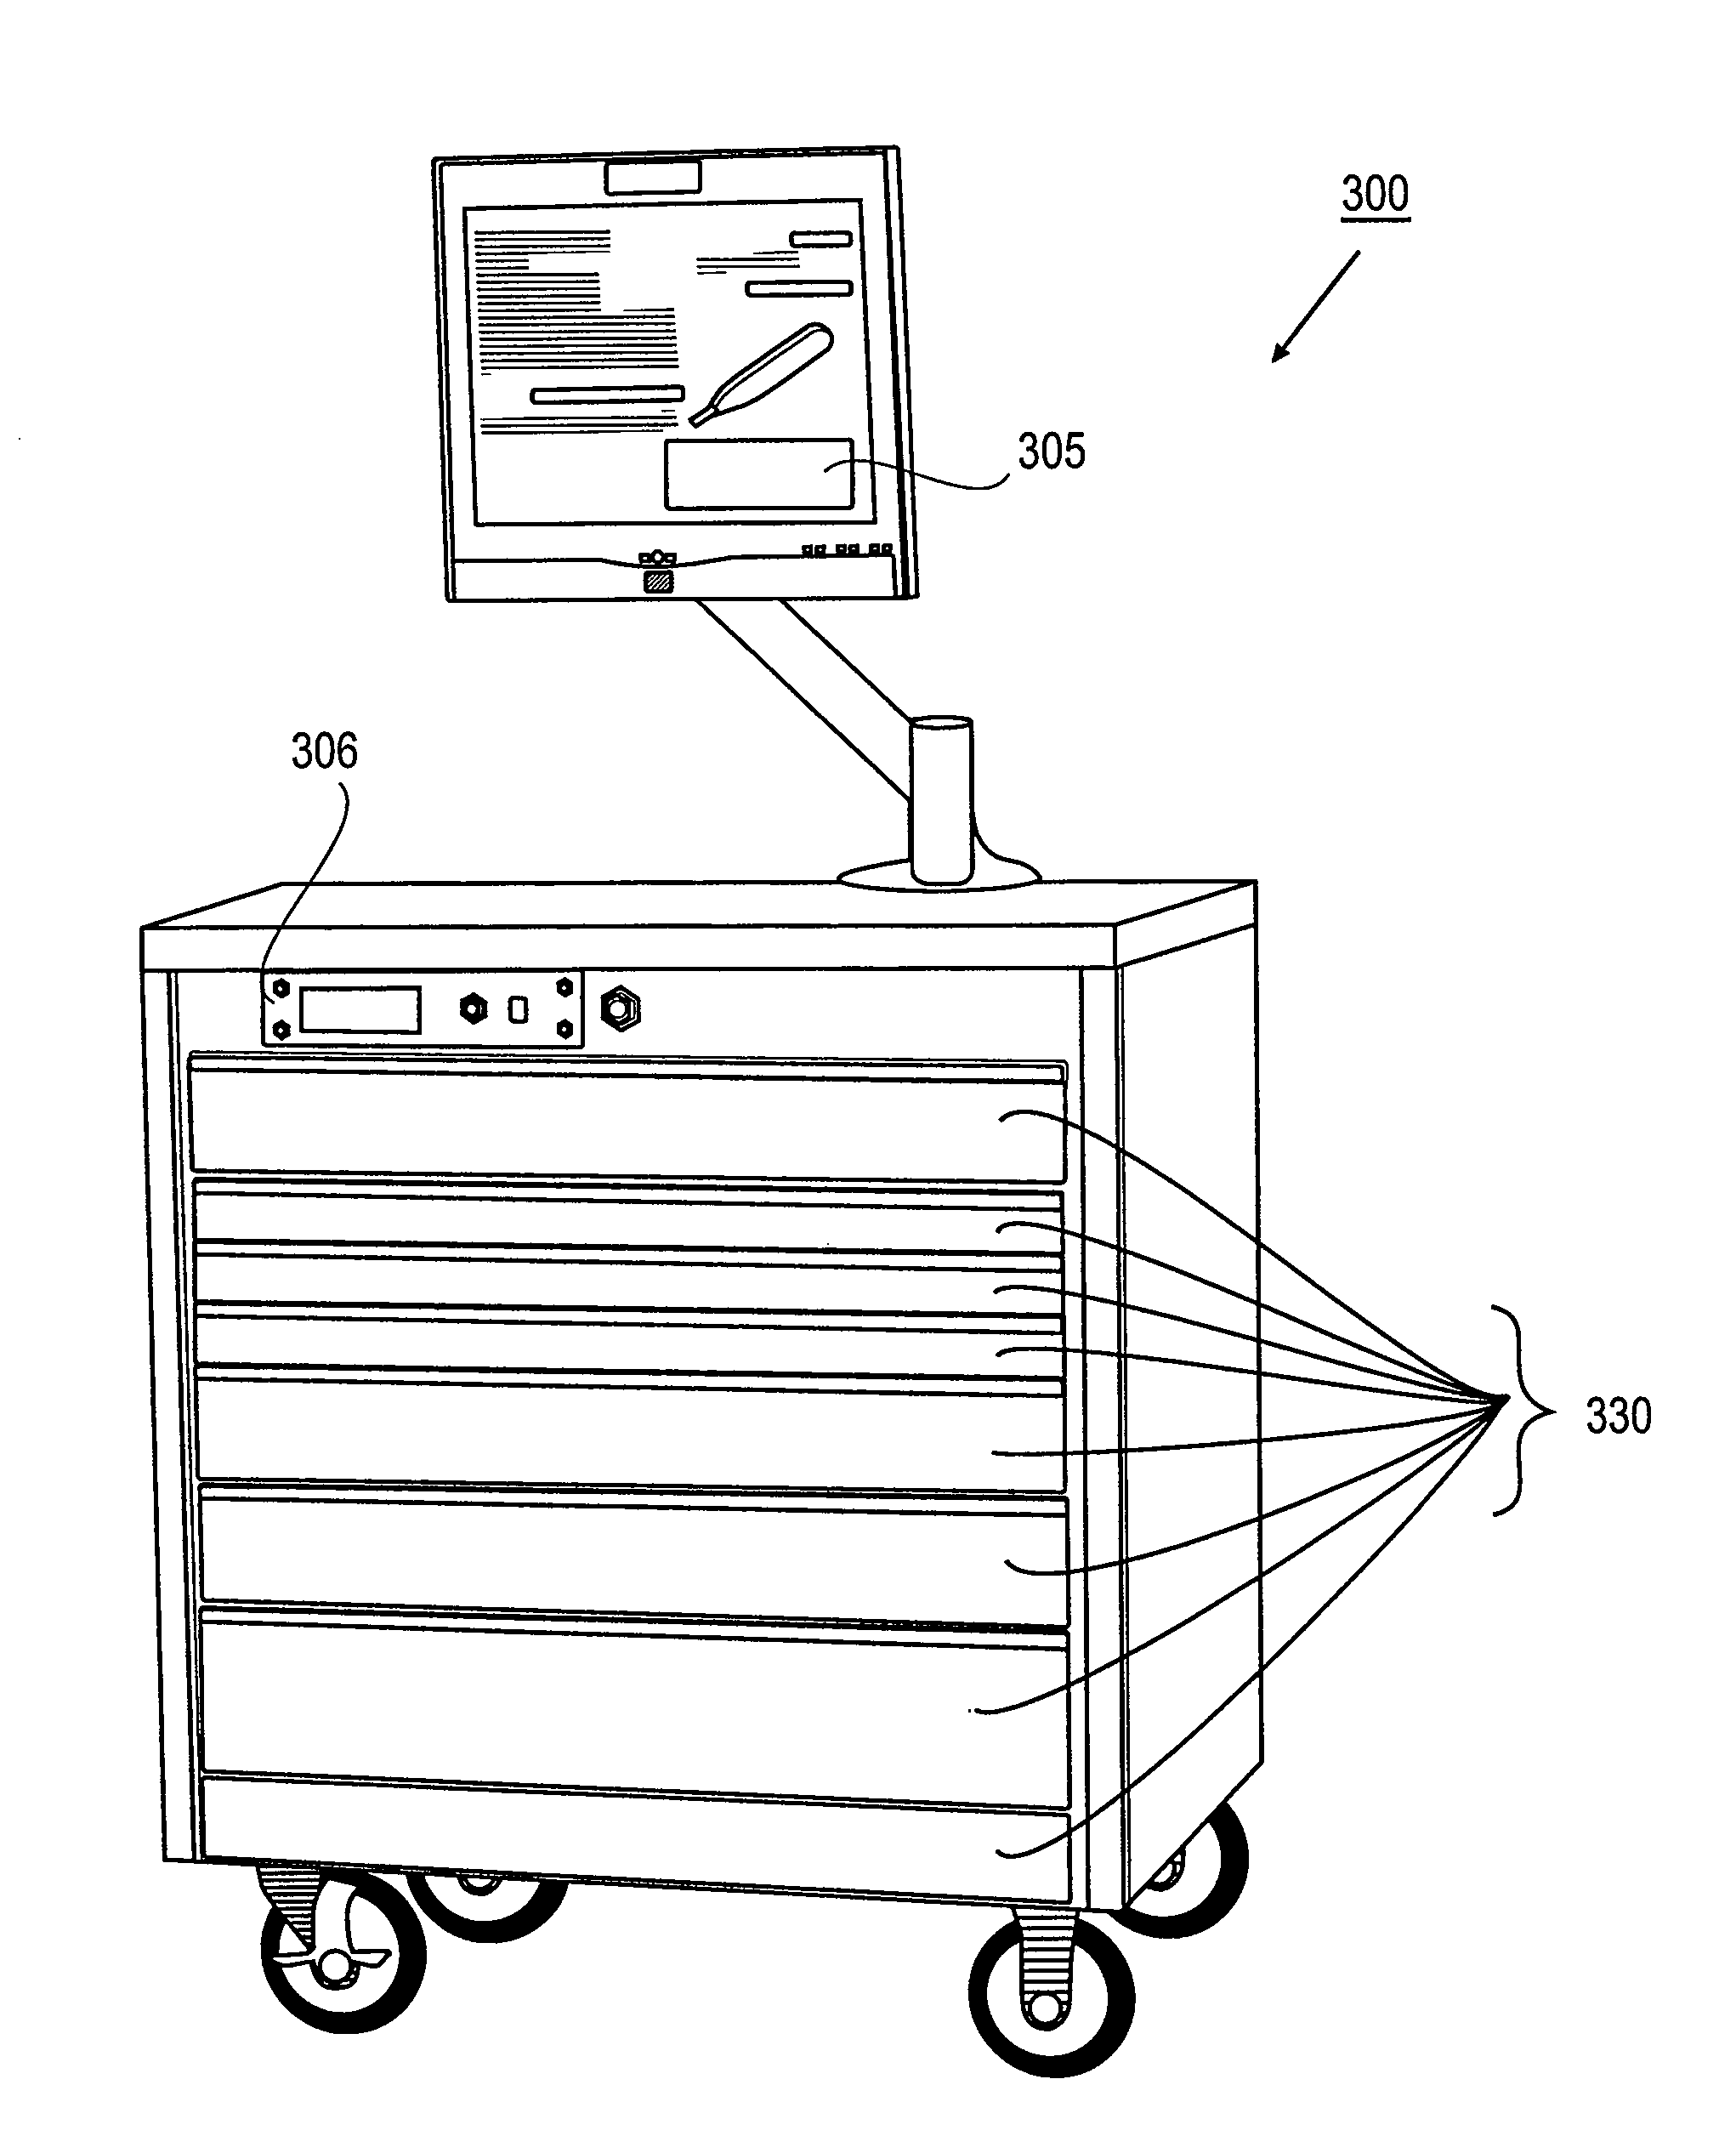 Image-based inventory control system using advanced image recognition